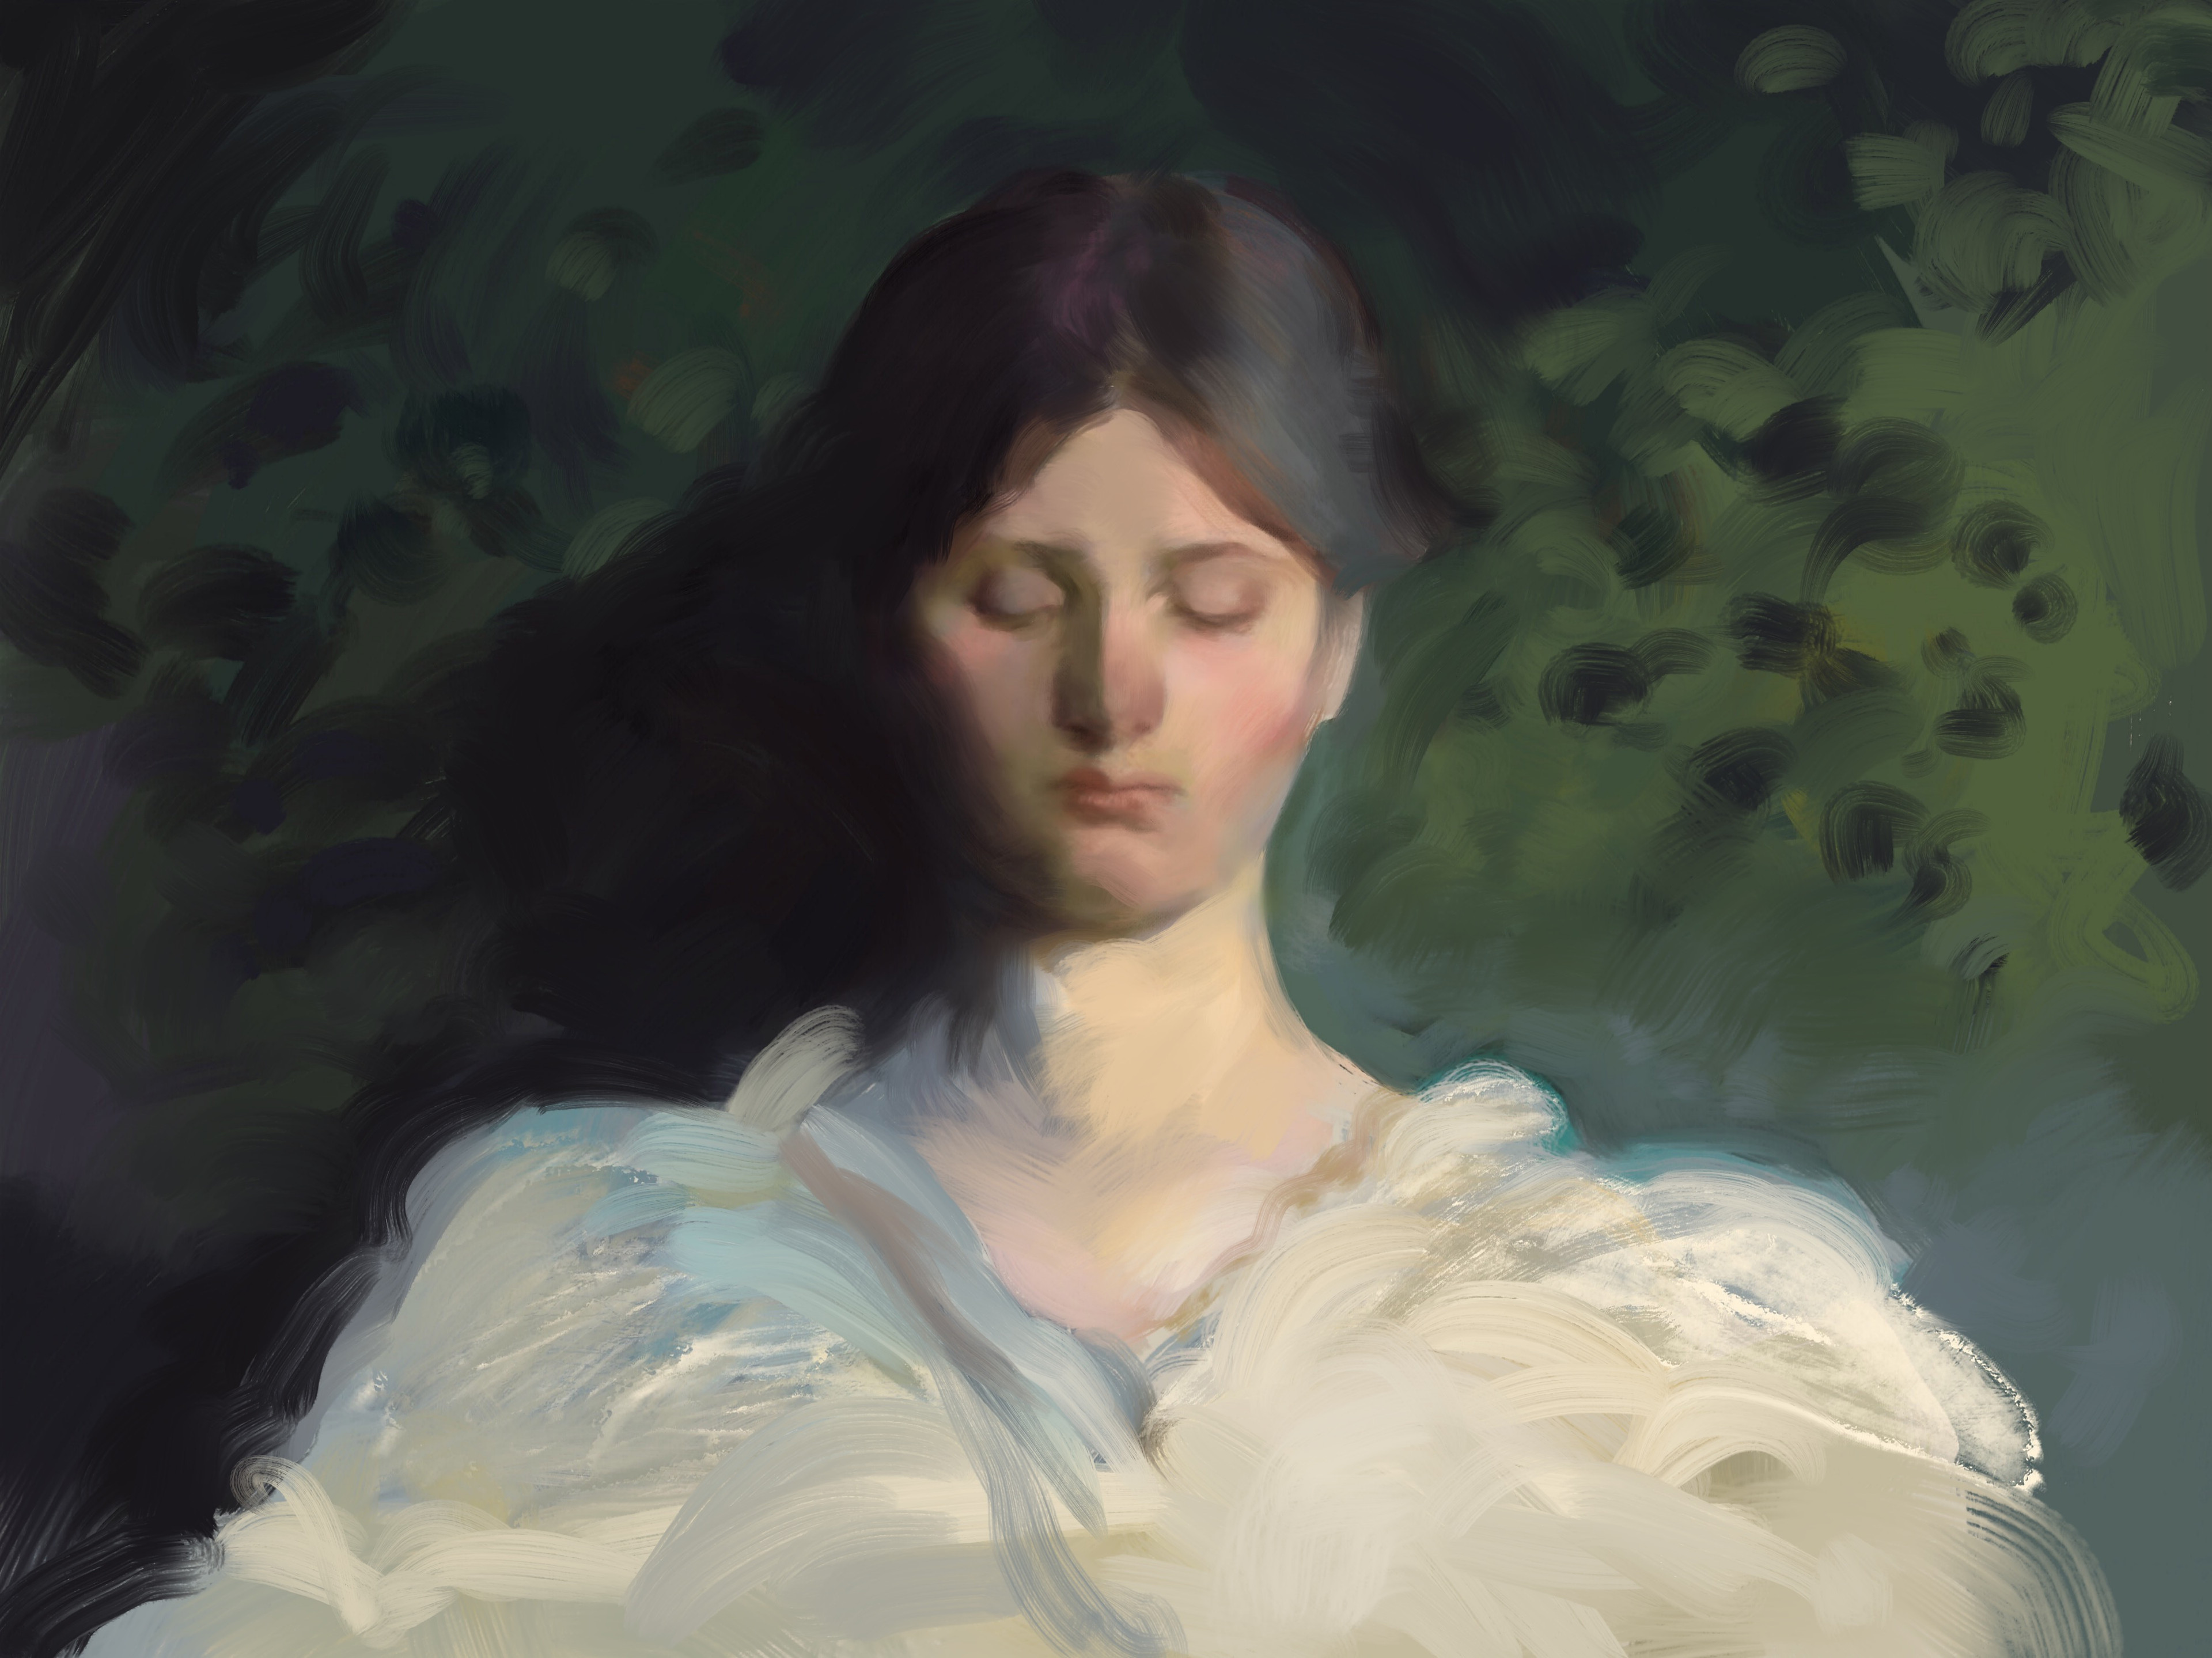 Playing around with painterly brushes, after Thayer.